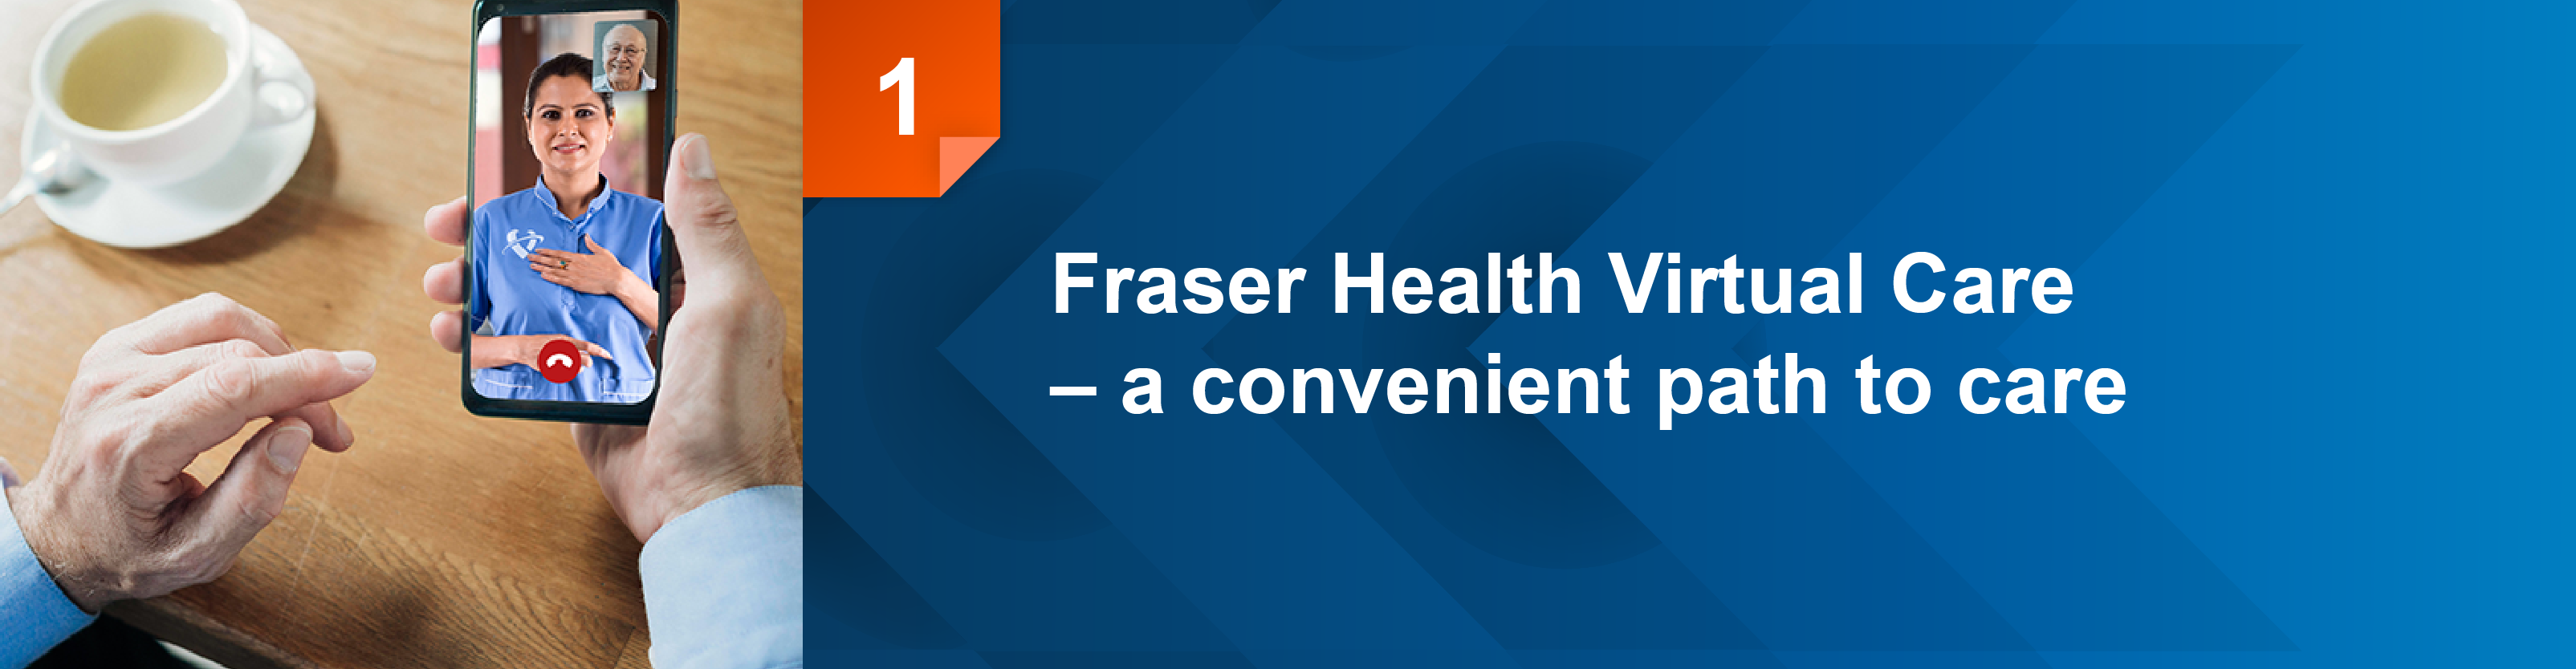 Fraser Health Virtual Care is a convenient path to care